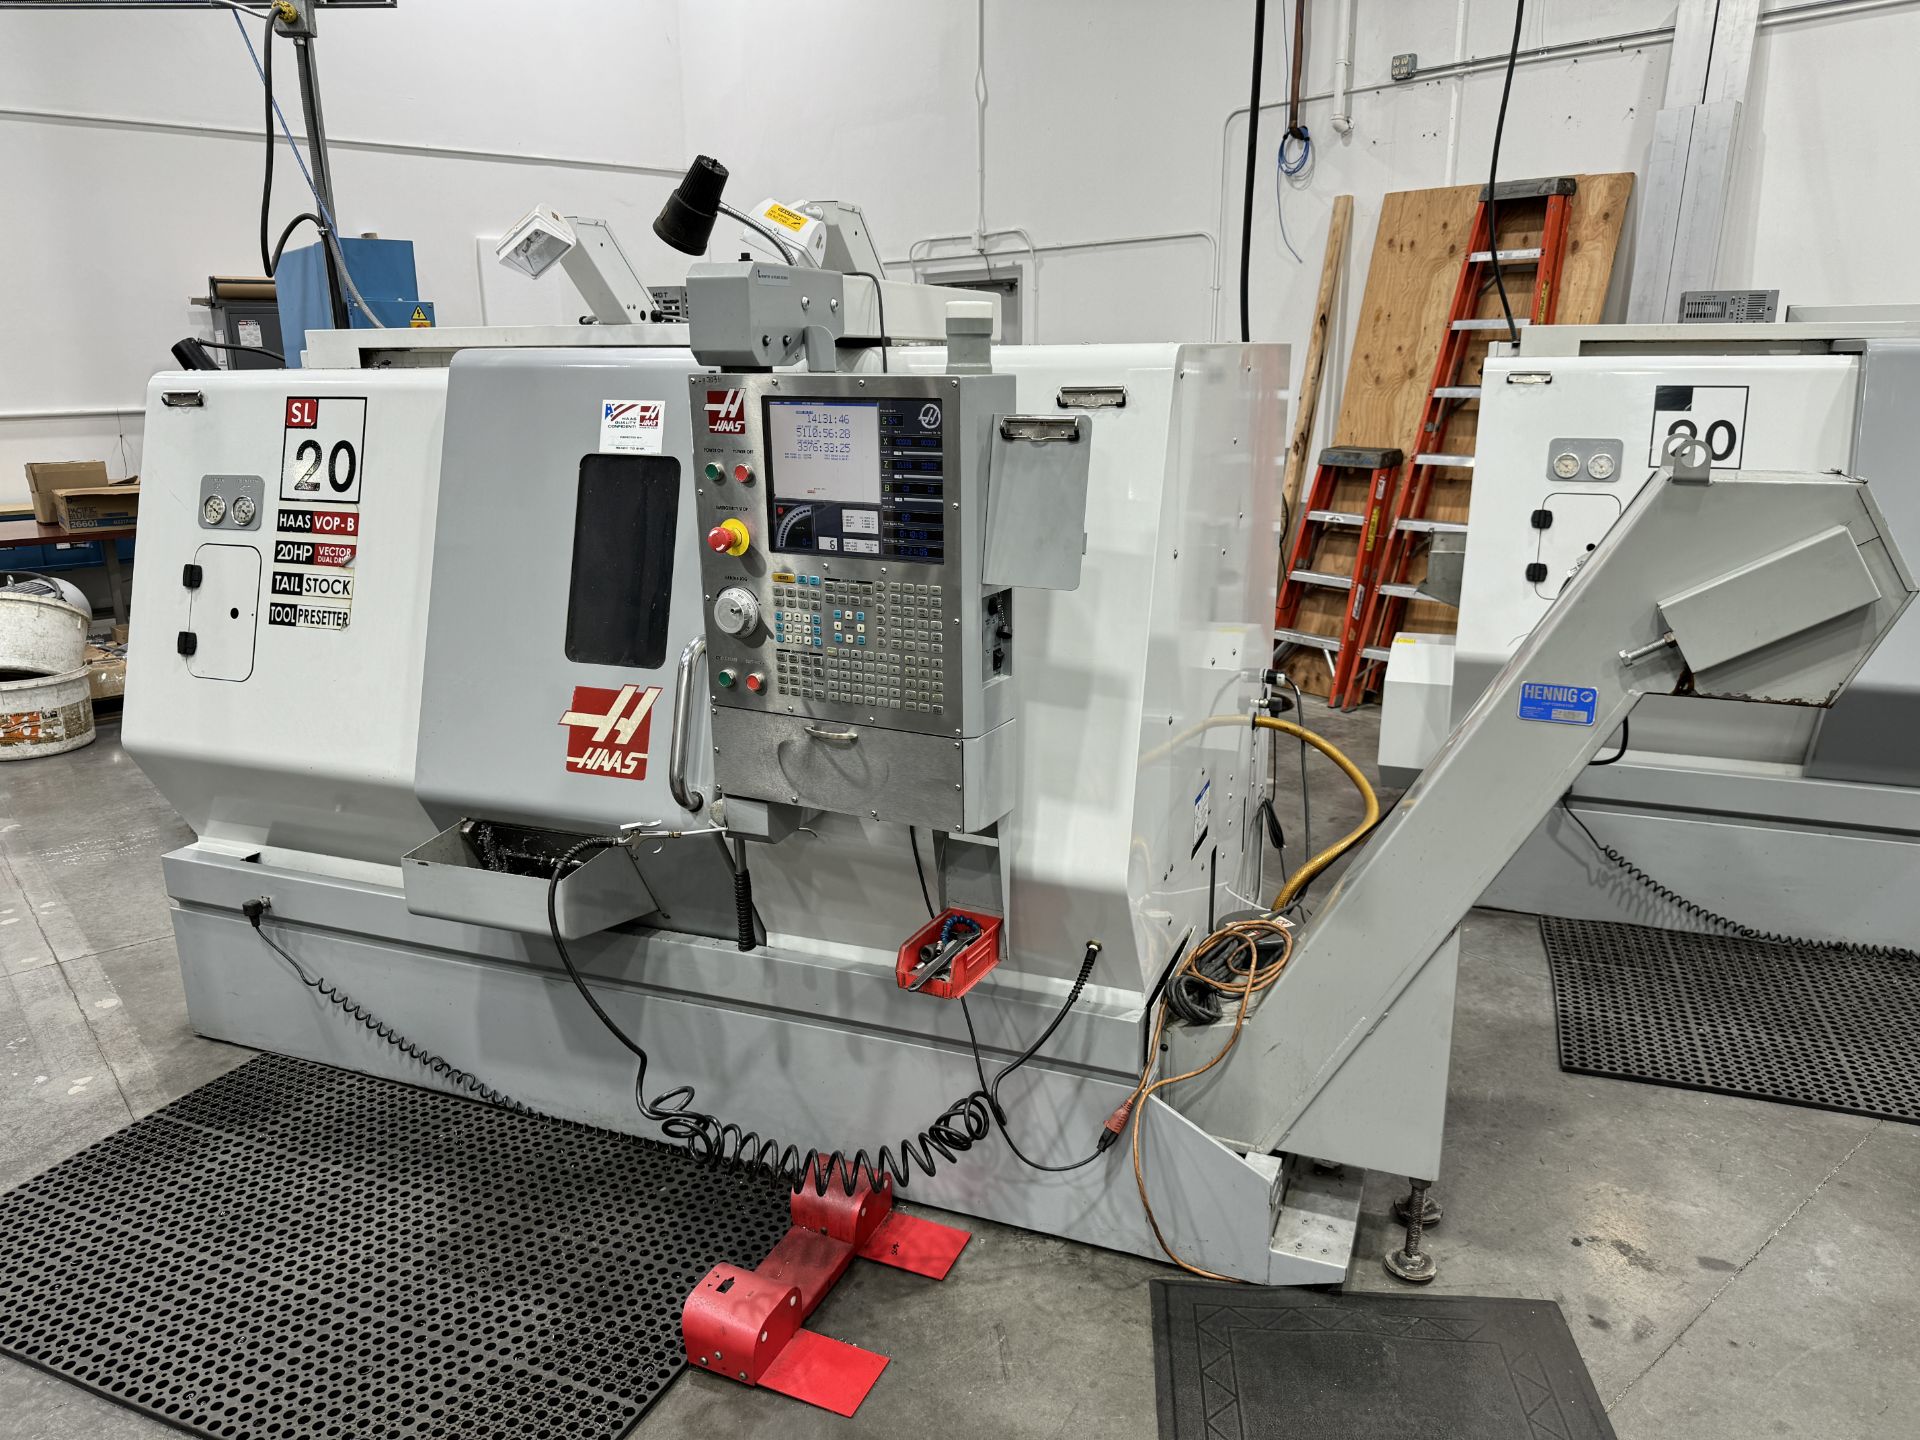 2007 HAAS SL-20T TURNING CENTER, 8" CHUCK, 5C COLLET NOSE, TAILSTOCK, 10-STATION TURRET, 2.0" BAR - Image 3 of 13